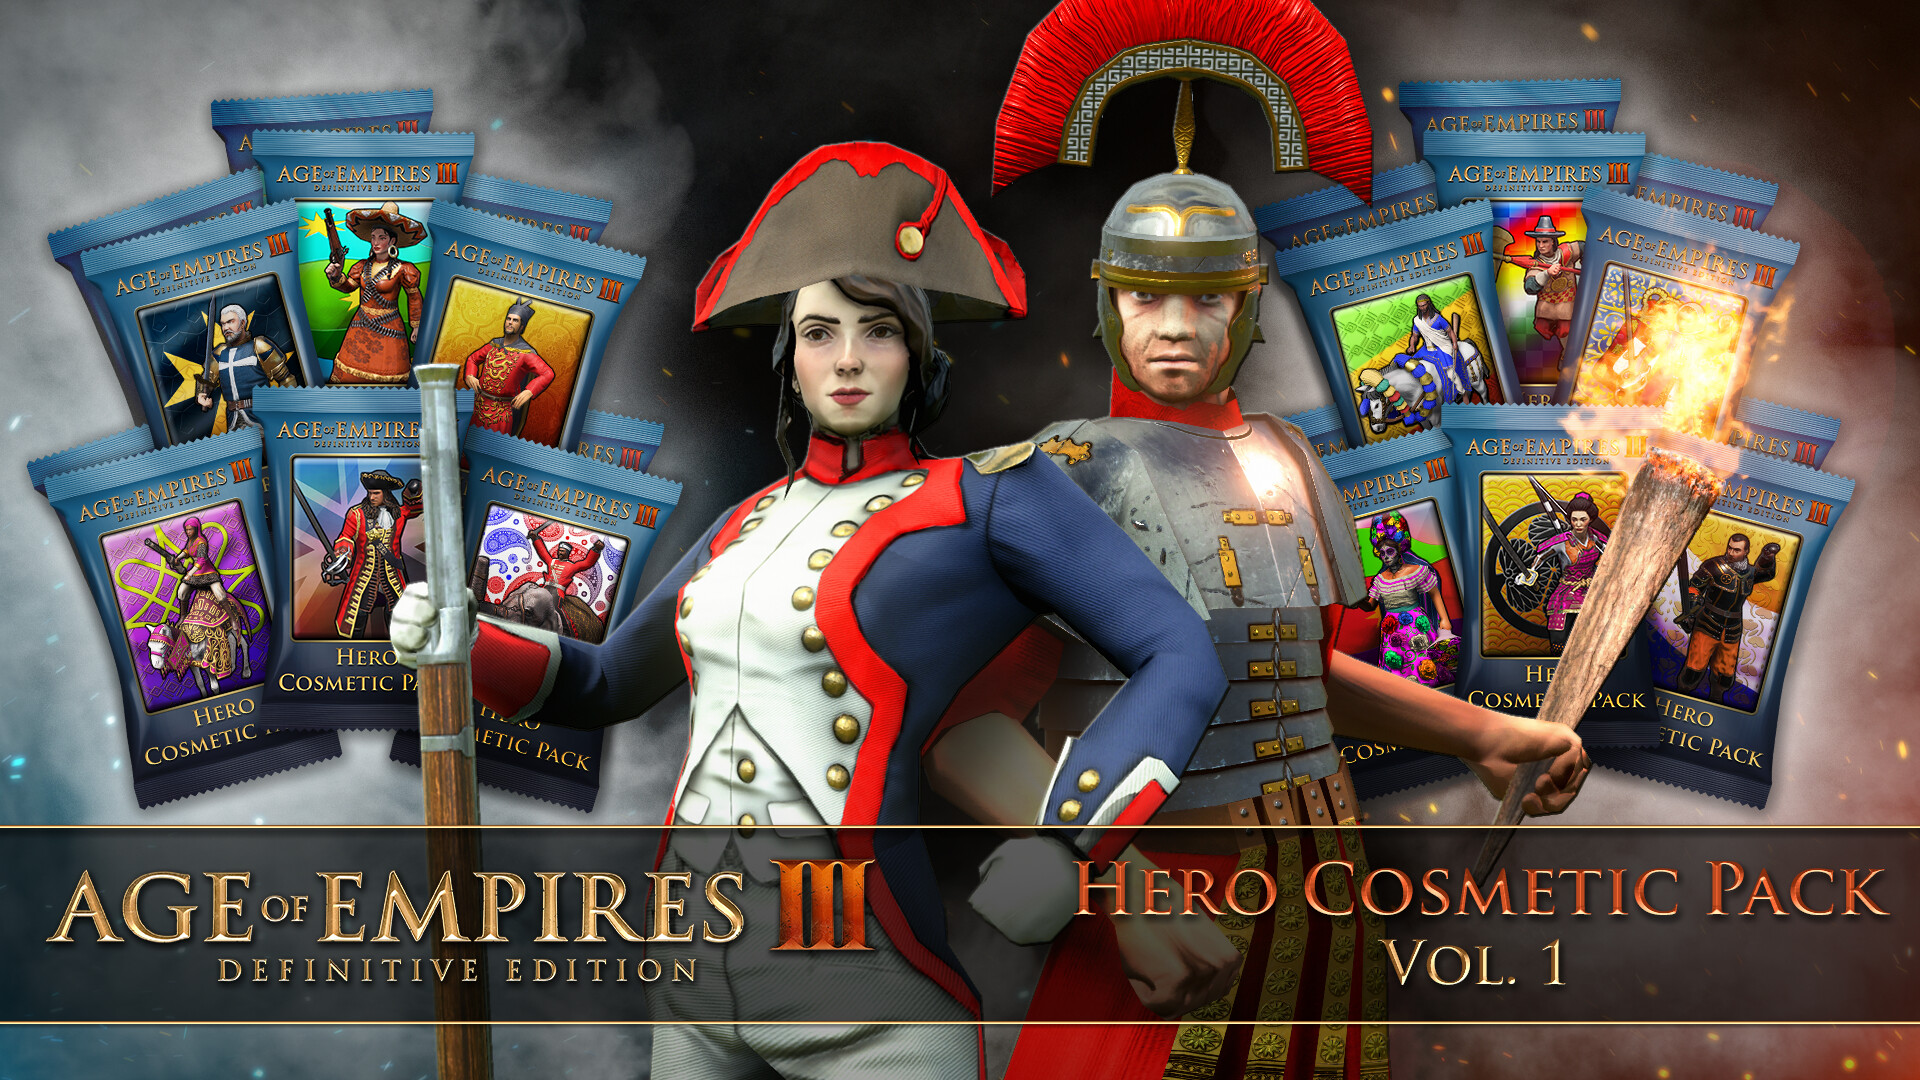 Age of Empires III: Definitive Edition – Hero Cosmetic Pack – Vol. 1 Featured Screenshot #1